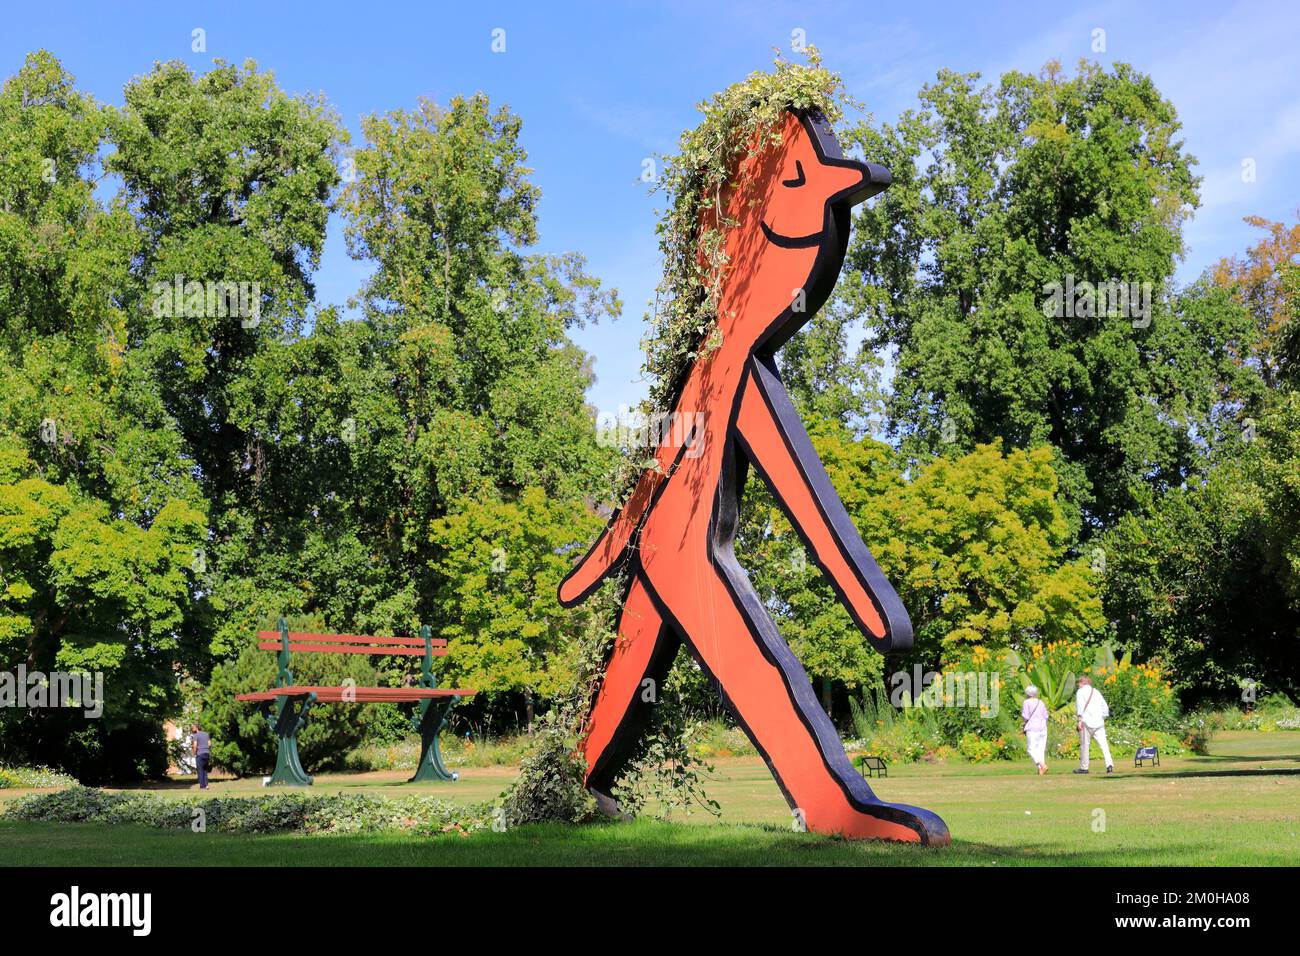 France, Loire Atlantique, Nantes, Jardin des Plantes, botanical garden classified as a Remarkable Garden, monumental work by Jean Jullien entitled Filili Viridi with the giant Bench by Claude Ponti in the background Stock Photo